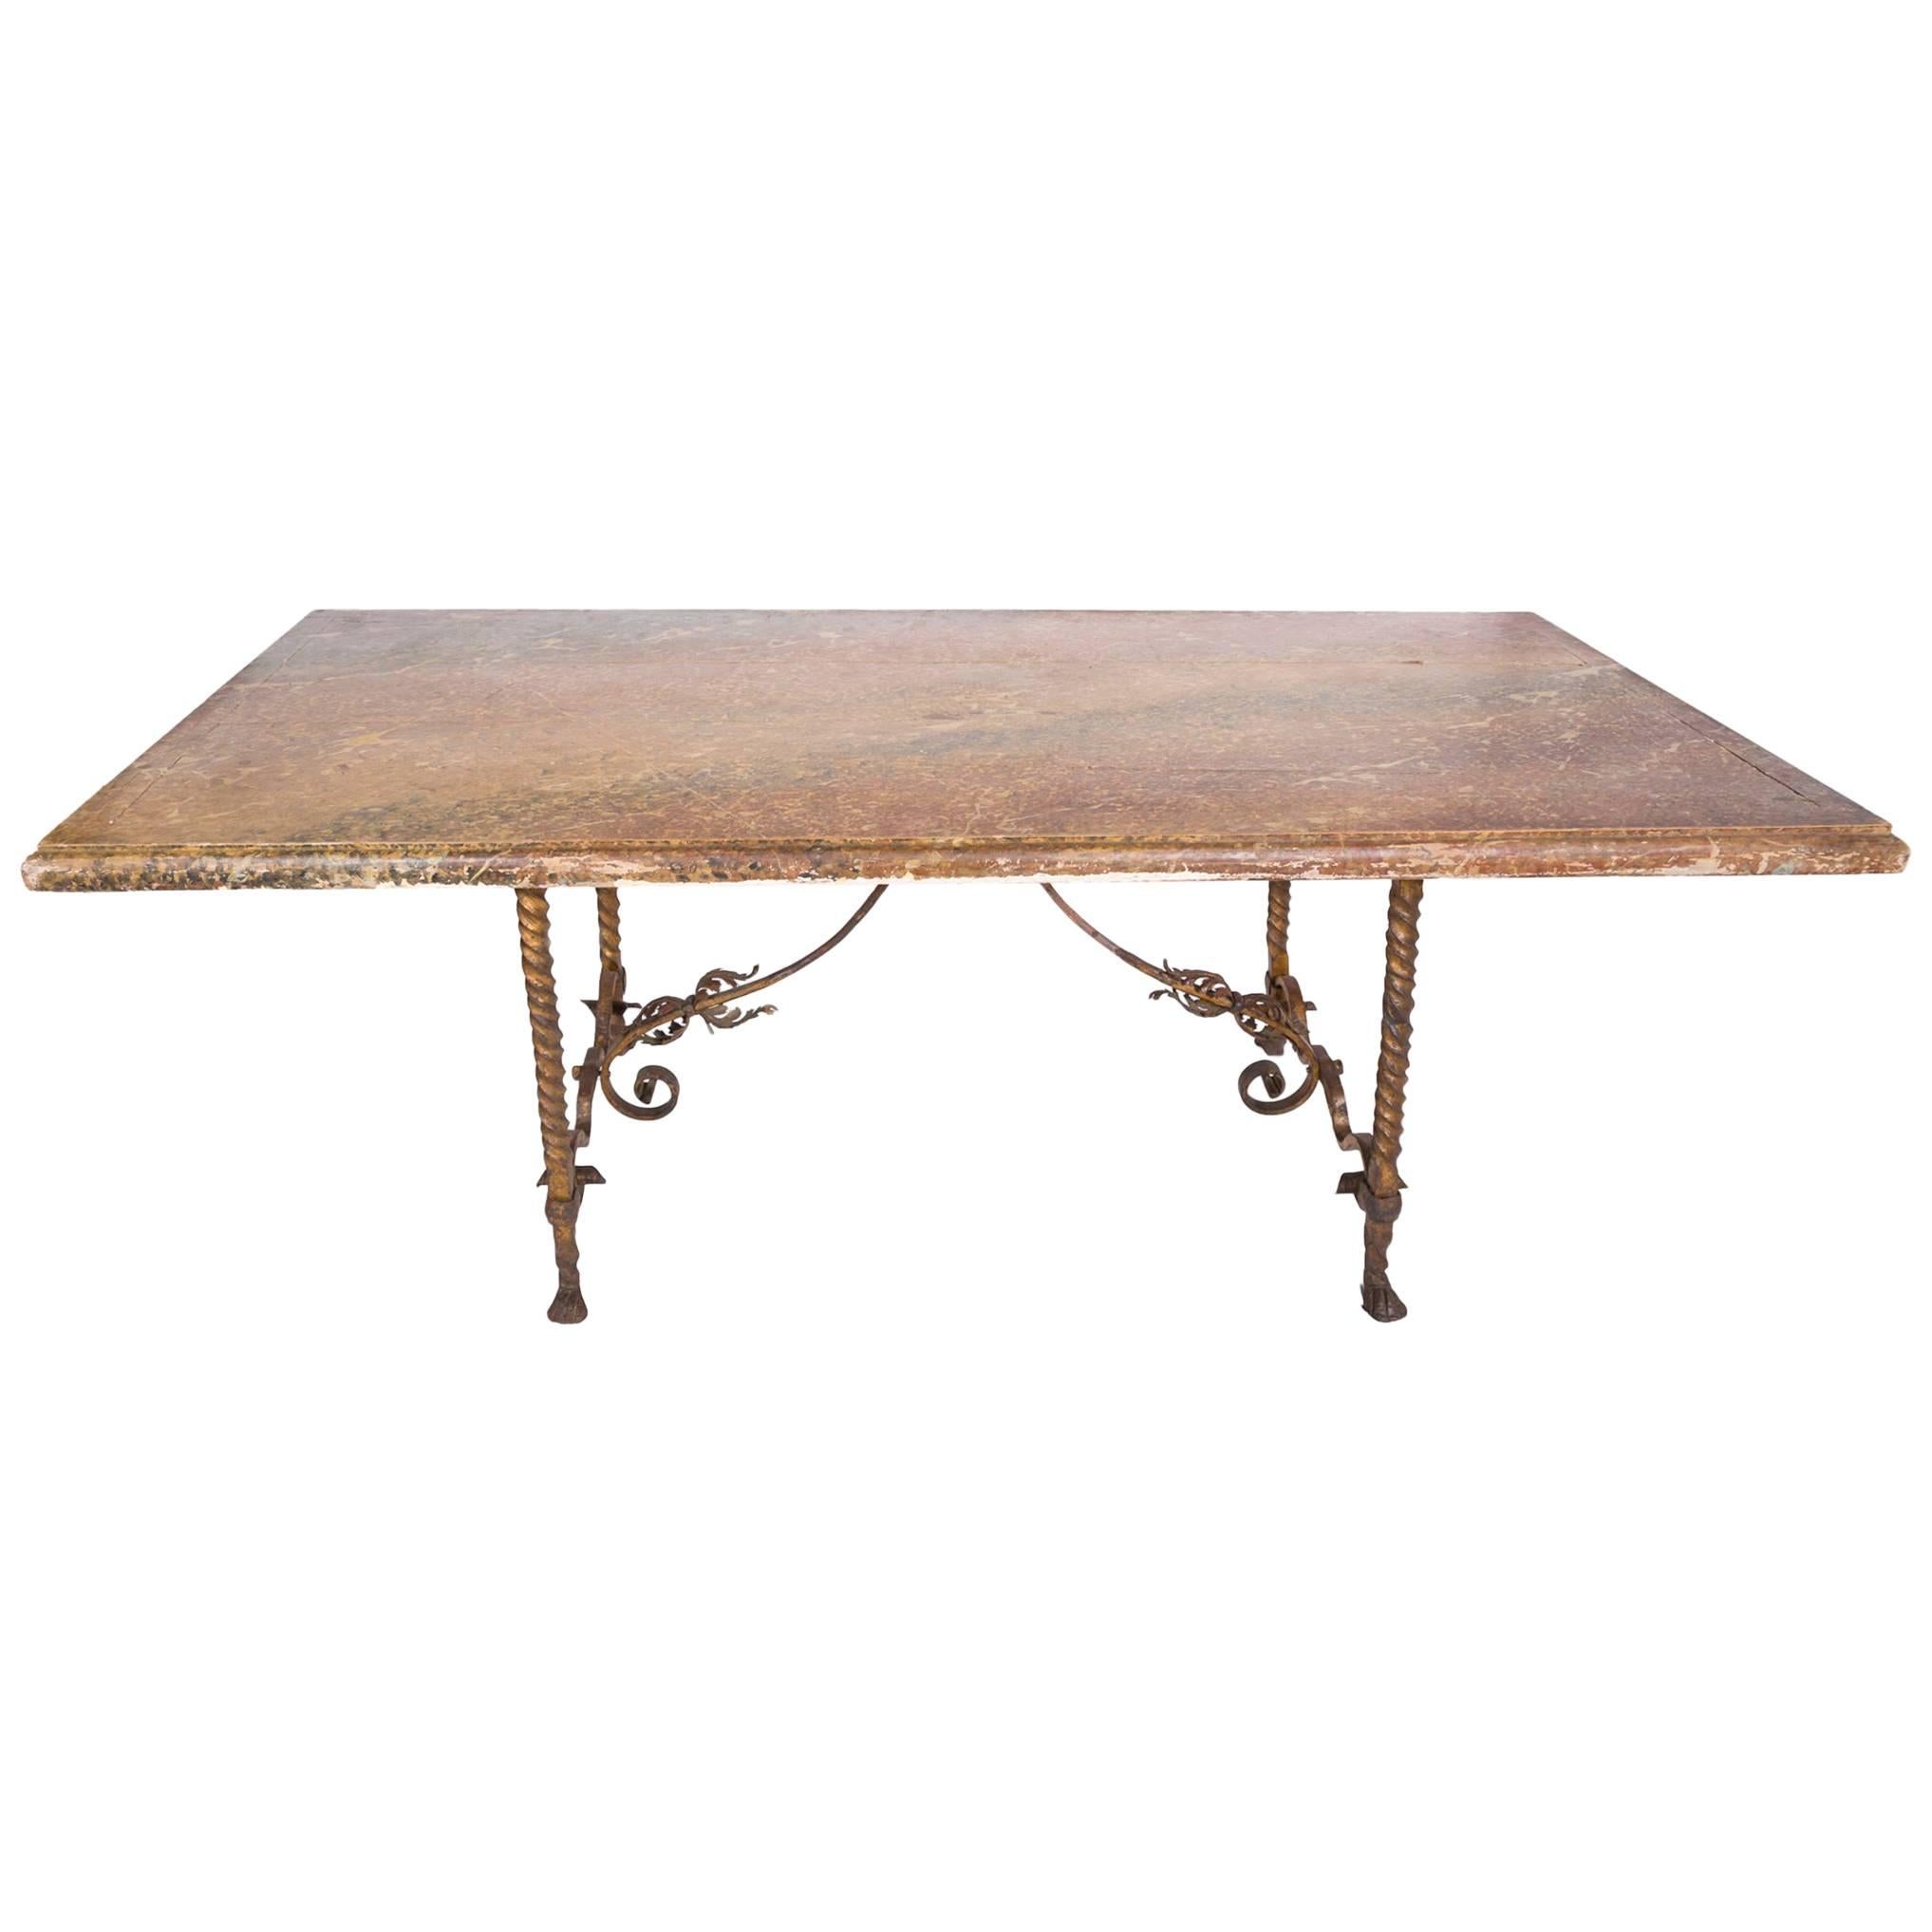 Vintage French Faux-Marble Table with Gilded Iron Base